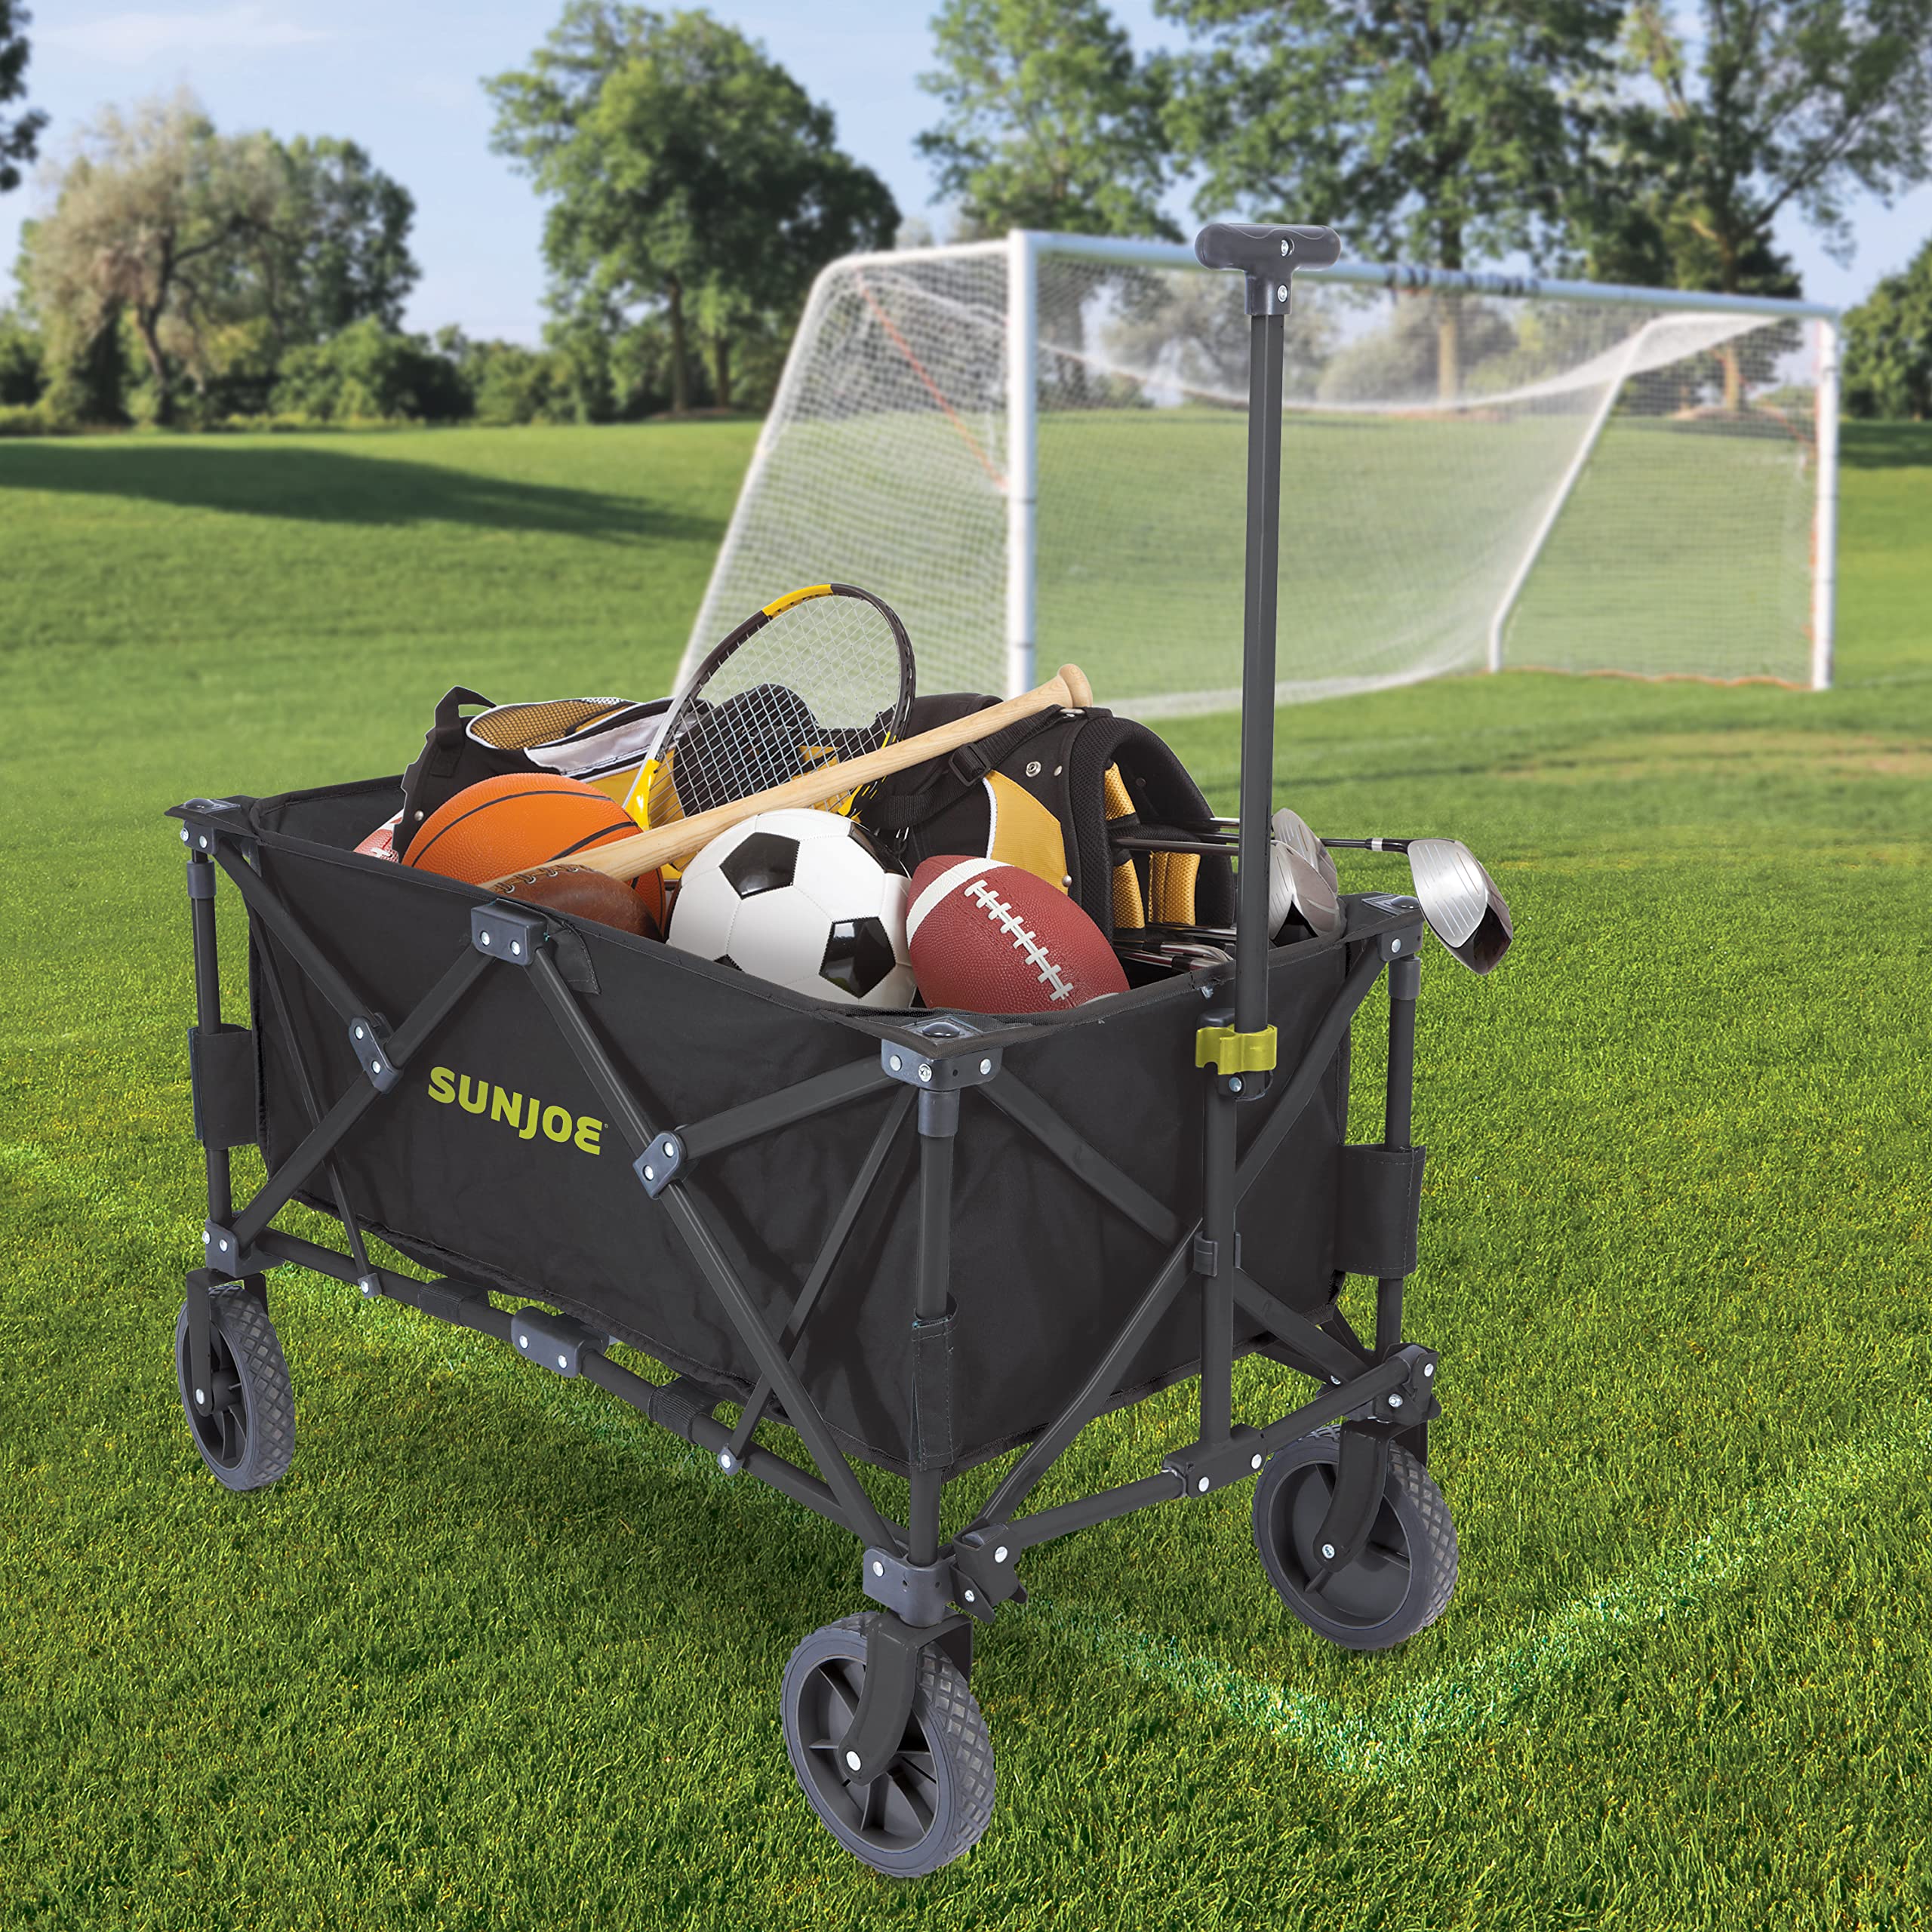 Sun Joe SJ-HDFC1 Heavy-Duty Metal Framed Garden Utility Wagon, w/Swivel Front Wheels & Adjustable Handle, Collapsible Design for Easy Storage and Portability, 150 Lbs Load Capacity, Black